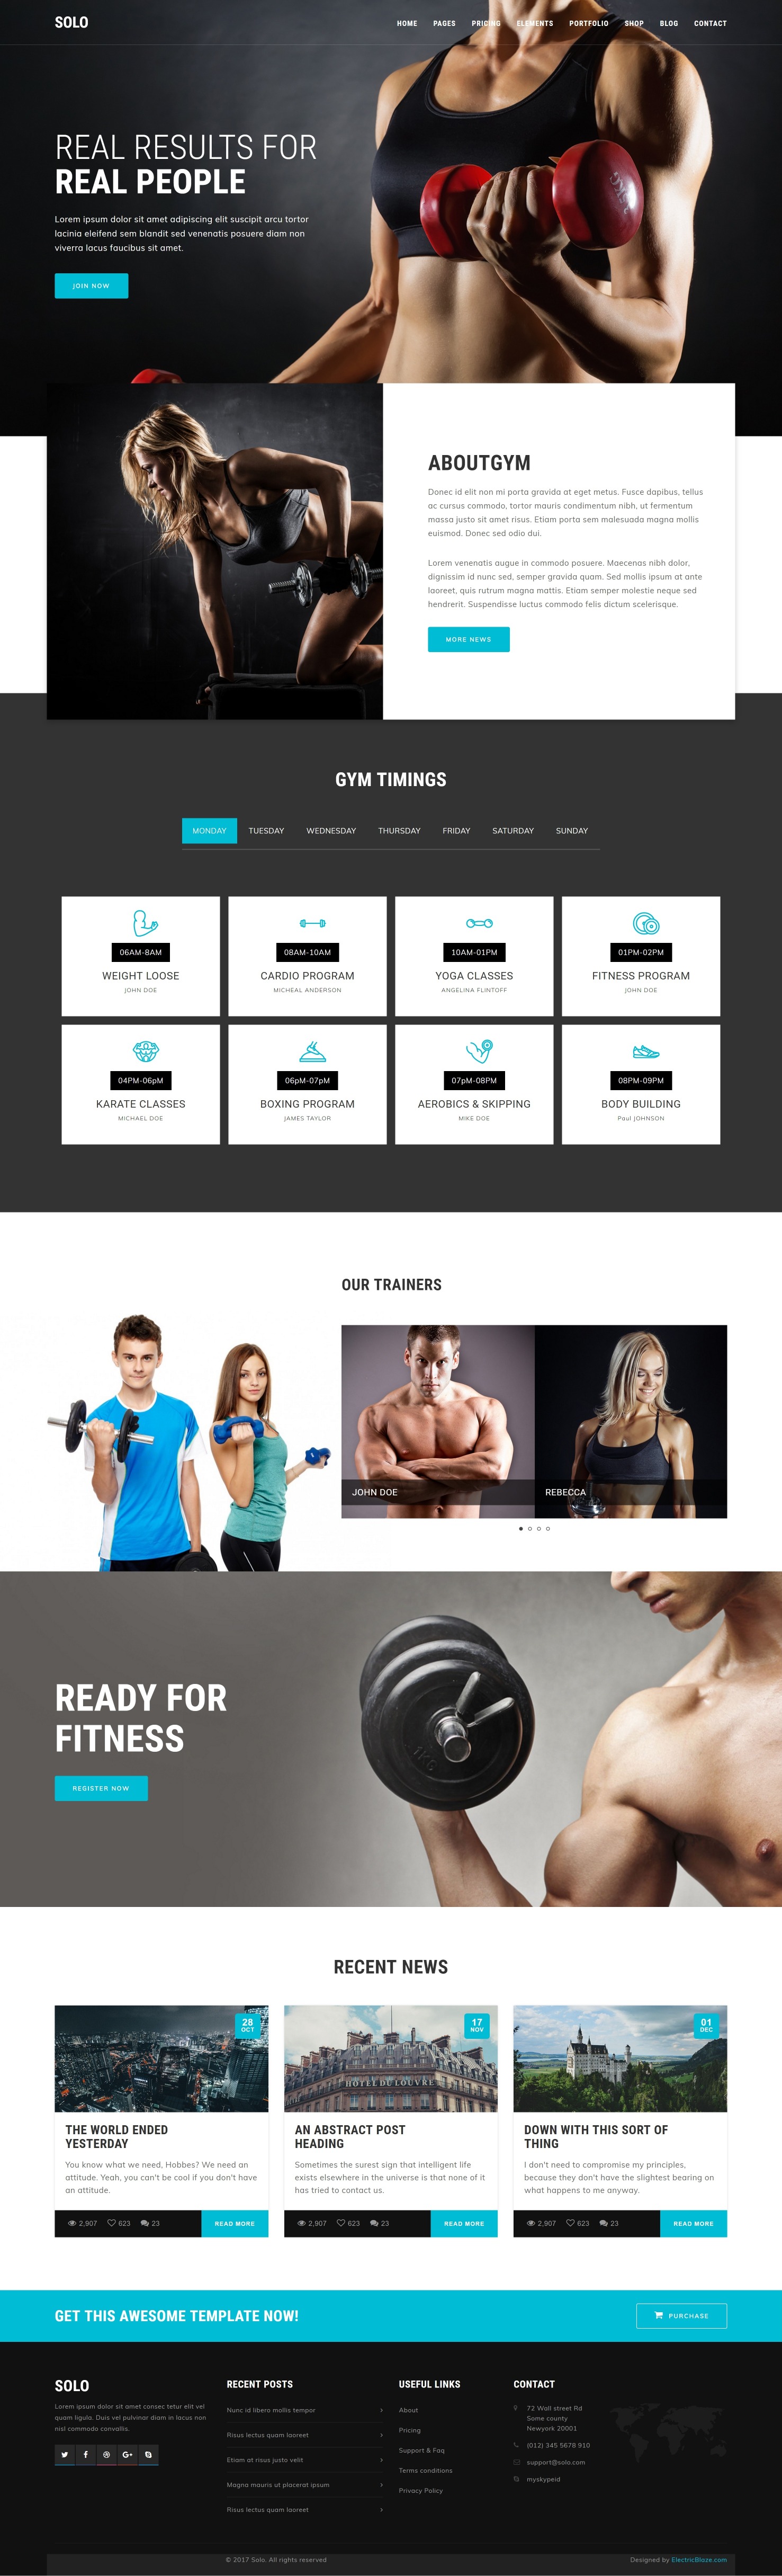 Solo - 103+ Pages HTML Bootstrap Template - 4